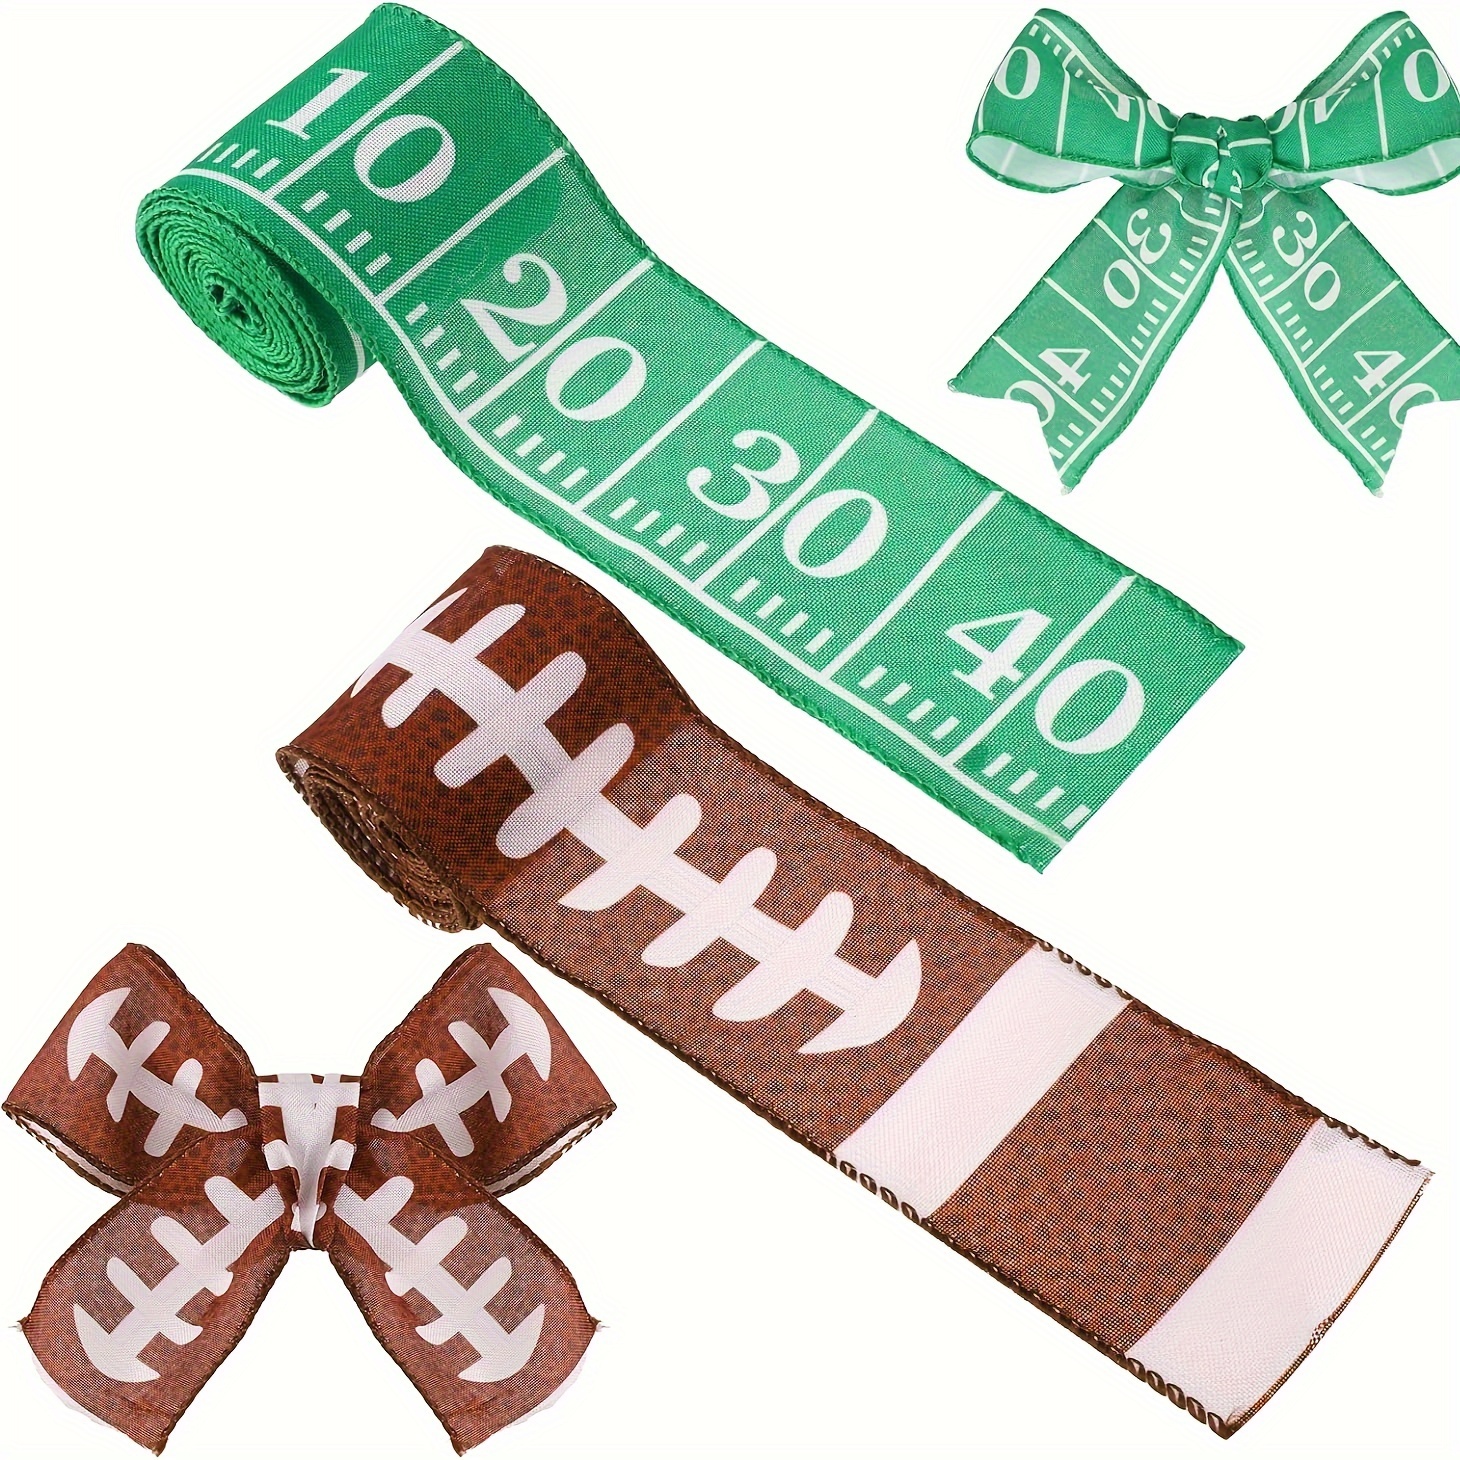 

2 Rolls 5 Yards Football Wire Edge Ribbons 2.5 Inches Green Brown Burlap Ribbon For Crafting Fall Sports Ribbon For Wreath Gift Wrapping Bow Sewing Diy Crafts Party Decor